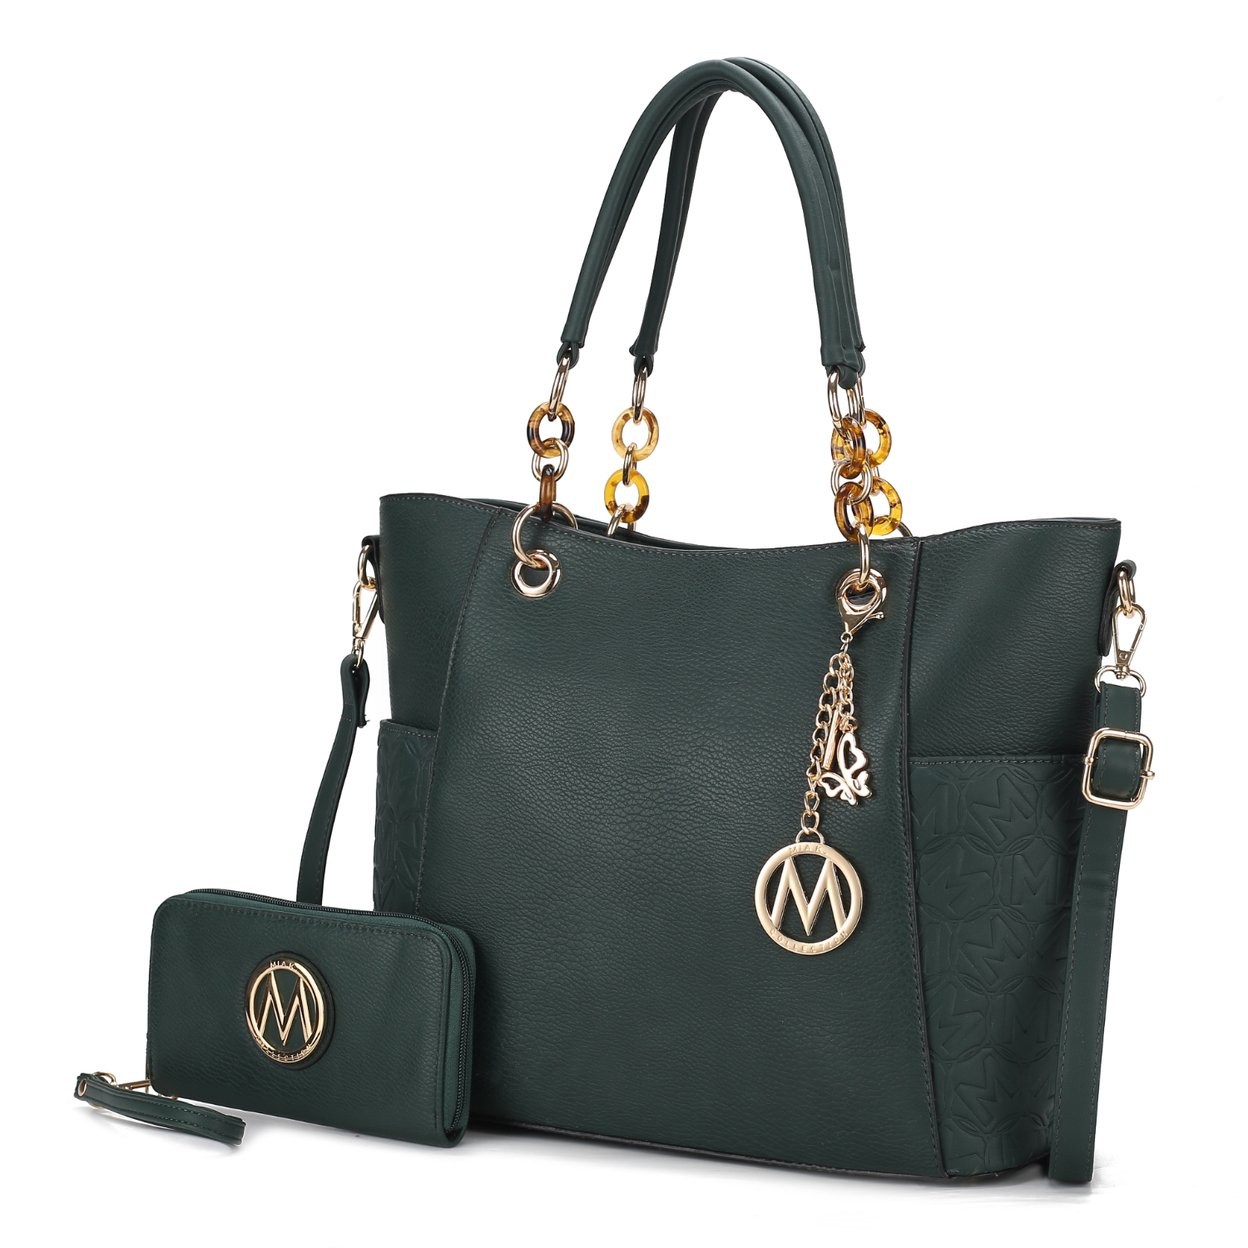 MKF Collection Merlina Embossed Pockets Vegan Leather Women's Tote Bag With Wallet - 2 Pieces By Mia K - Teal